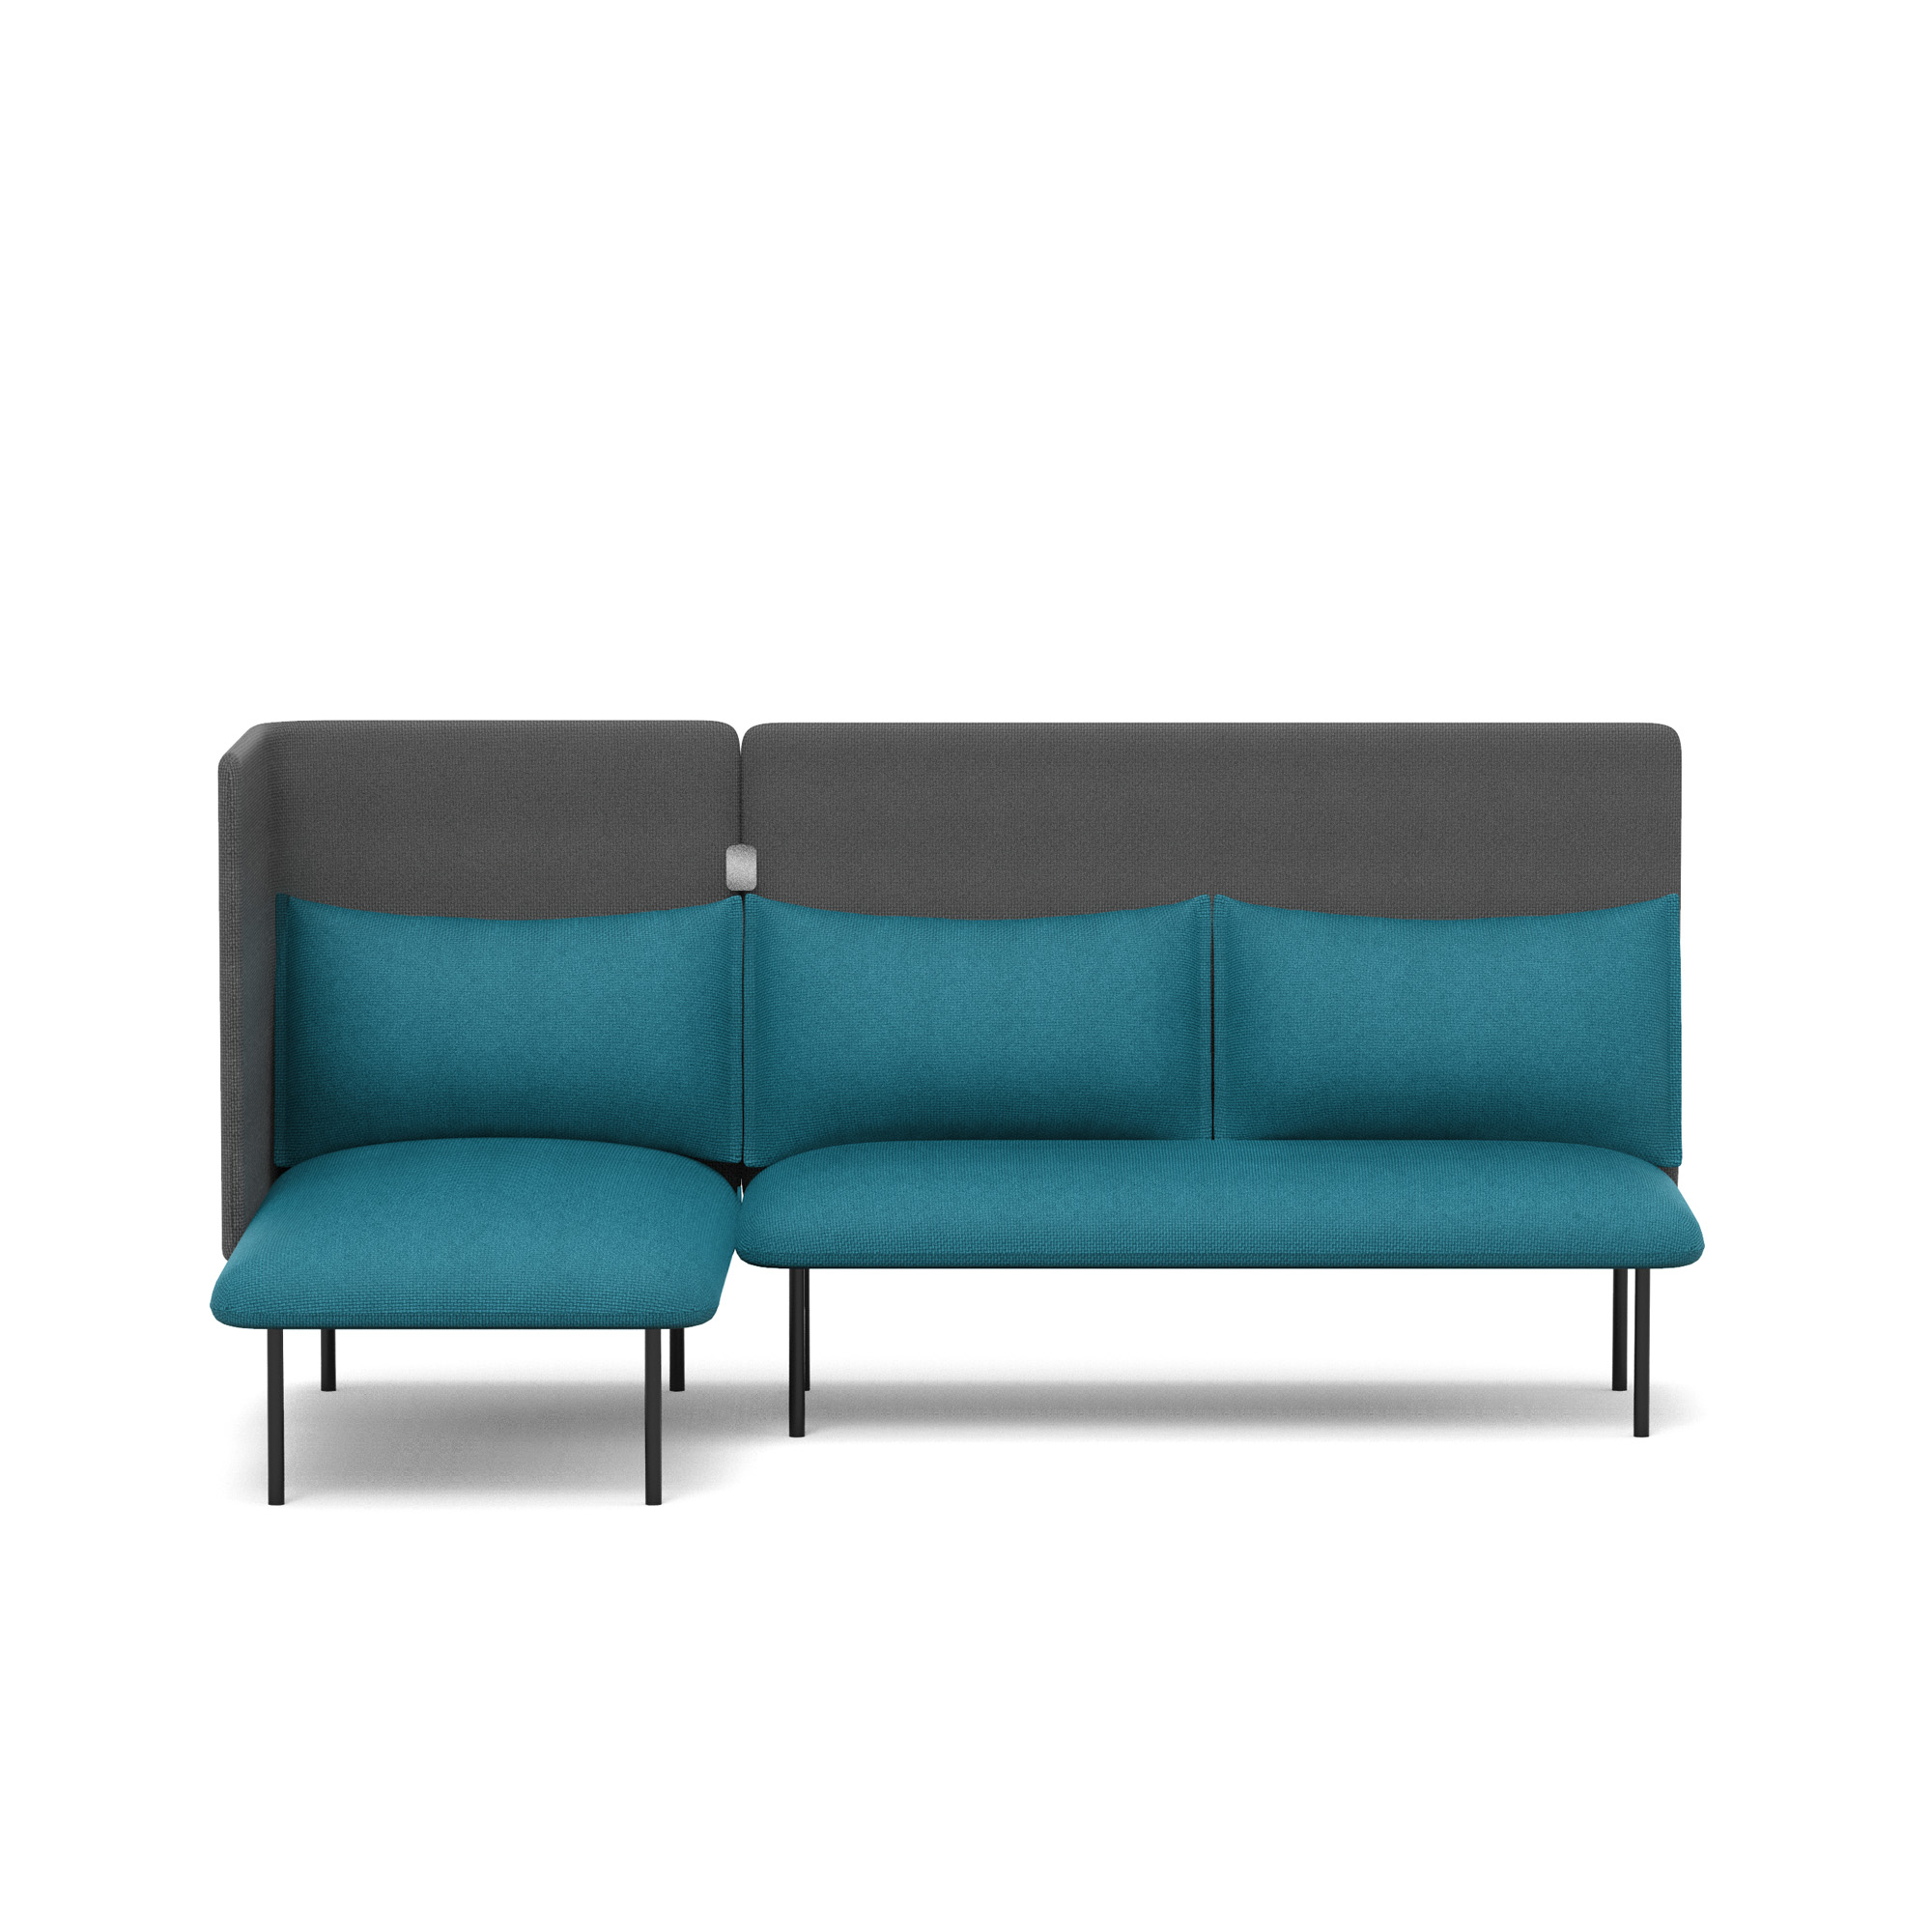 Teal + Dark Gray QT Adaptable Lounge Sofa + Left Chaise,Teal,hi-res